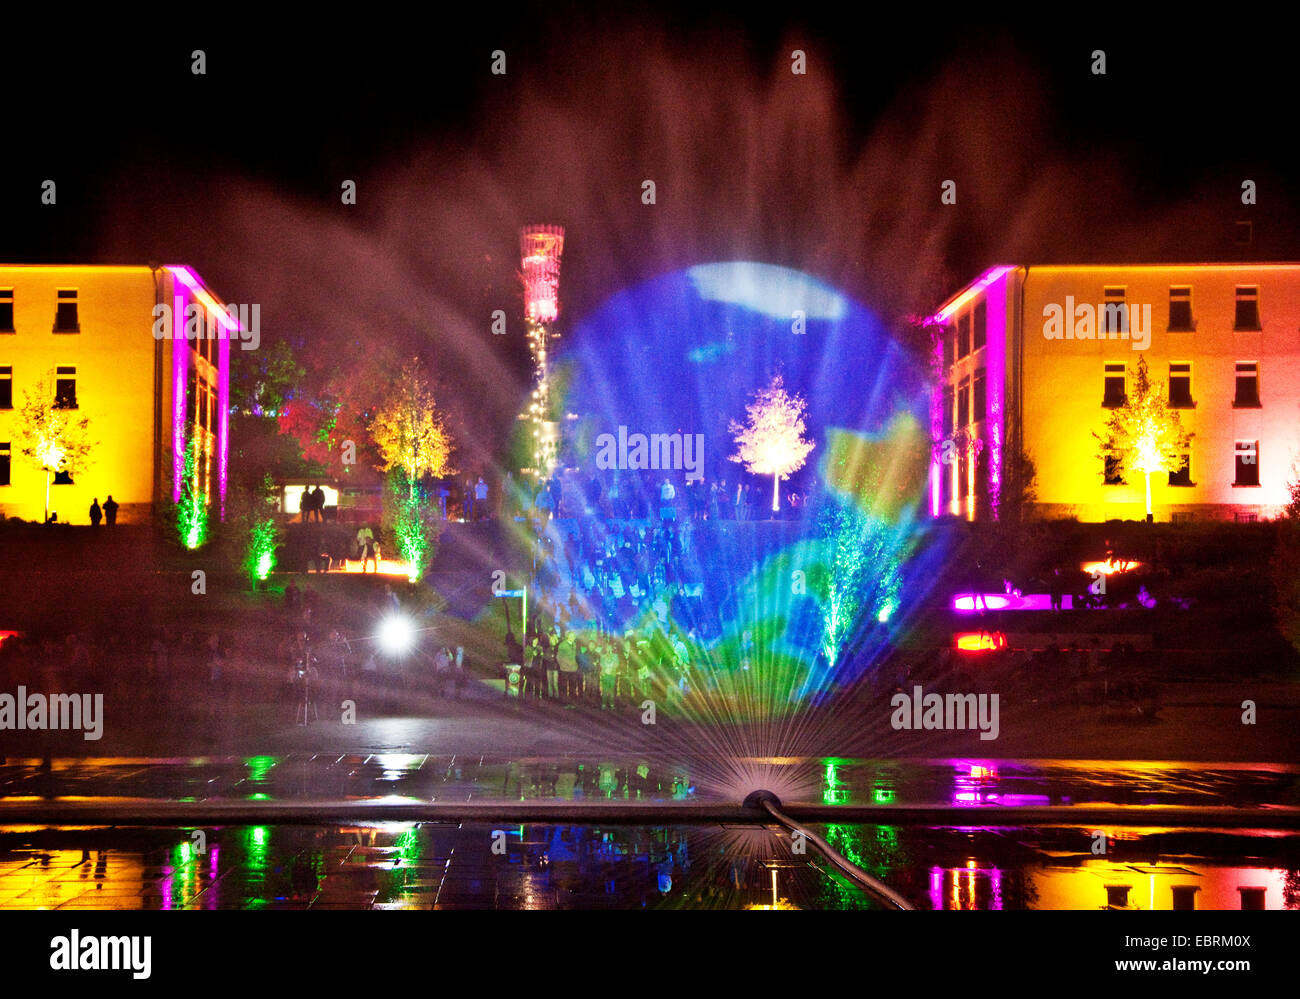 projection of a globe onto a water curtain during the 'Light Gardens' Event at the Sauerland Park, Germany, North Rhine-Westphalia, Sauerland, Hemer Stock Photo